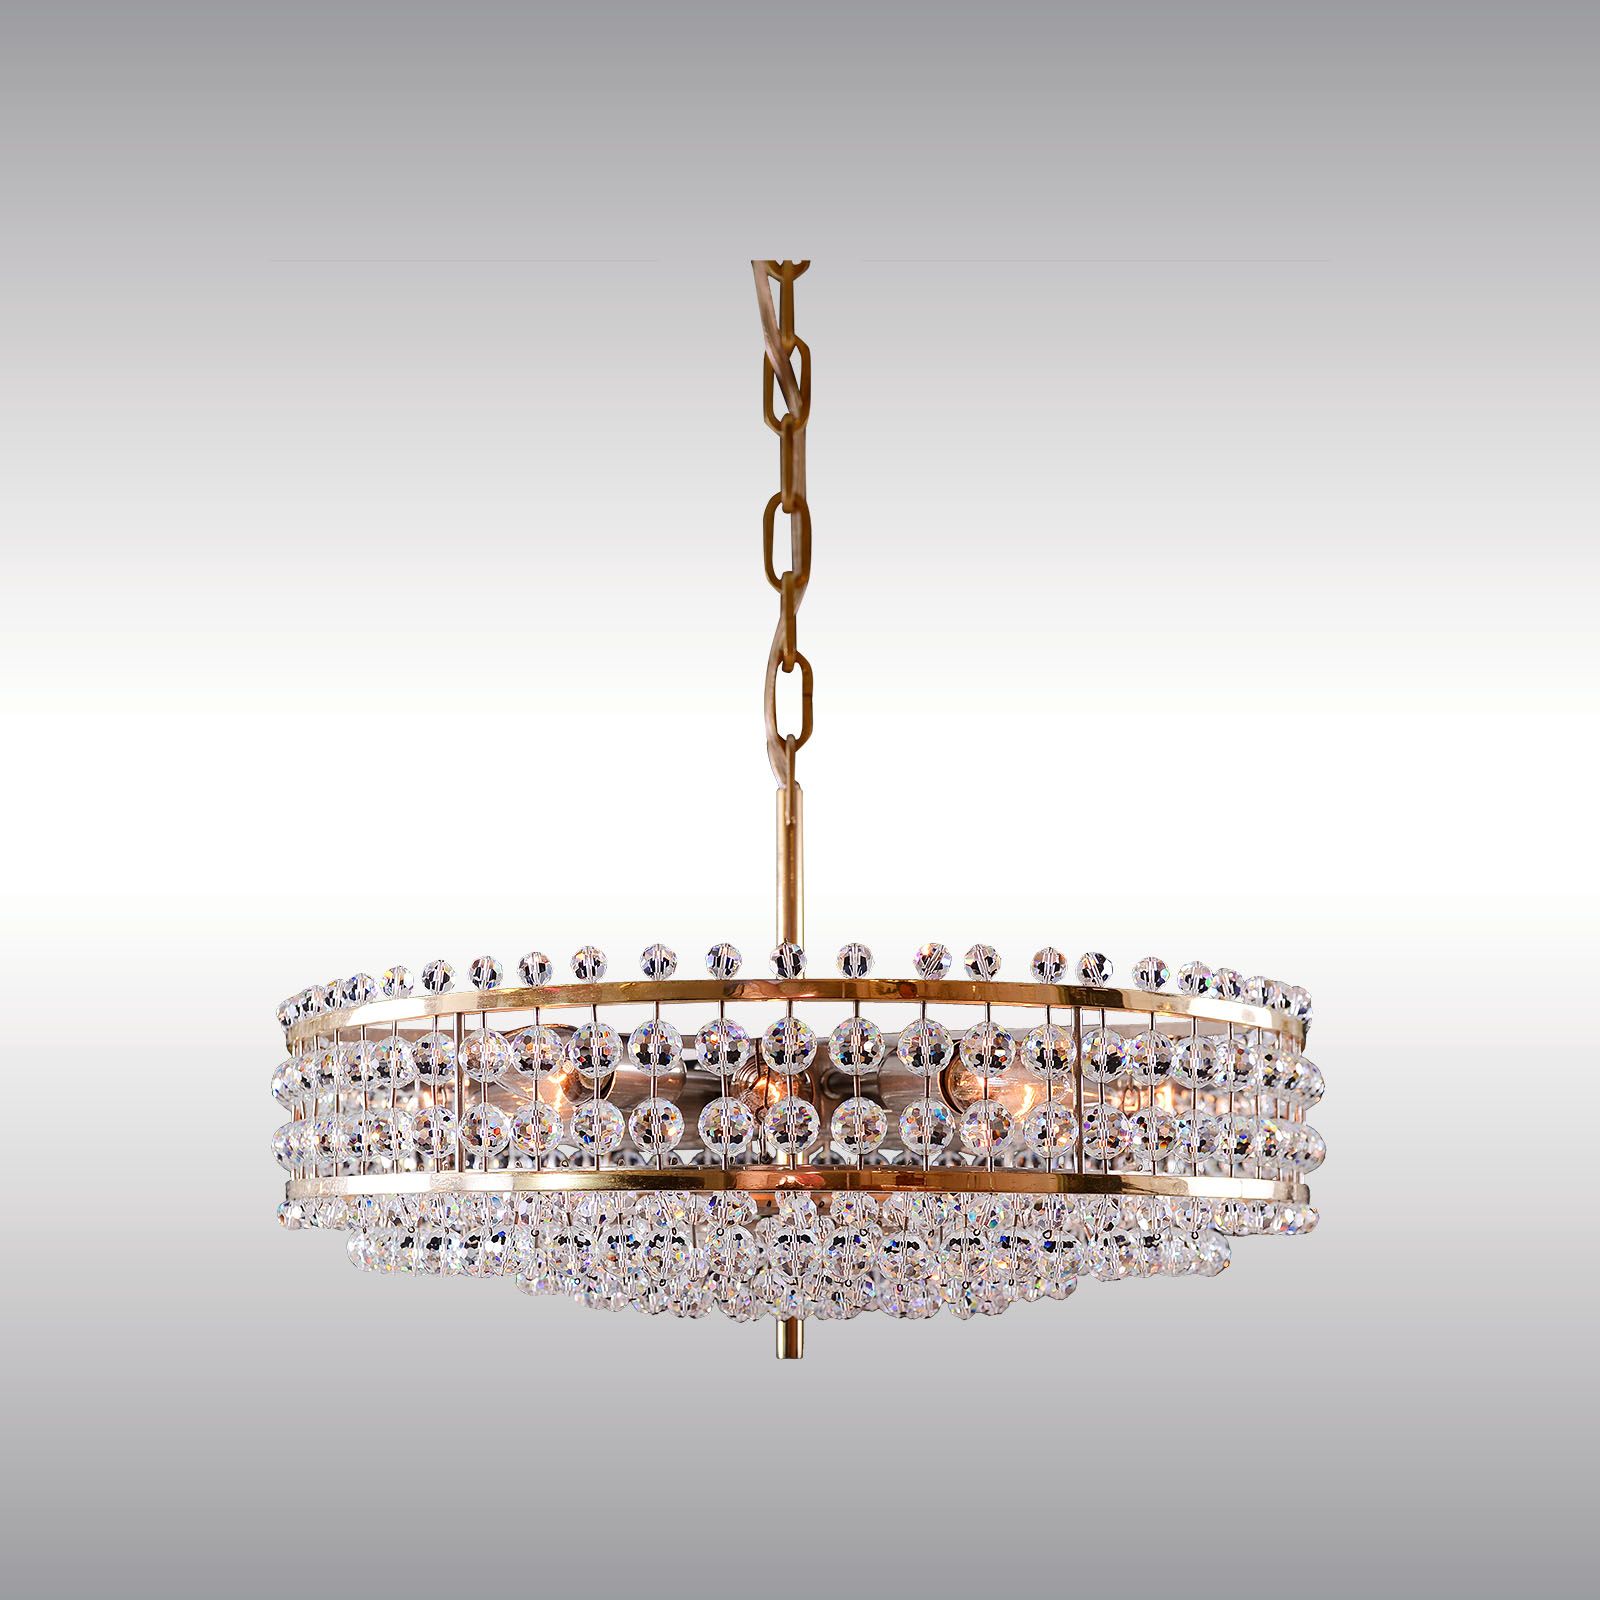 WOKA LAMPS VIENNA - OrderNr.: 80039|Very Charming and Delicate Bakalowits Chandelier - Design: Bakalowits